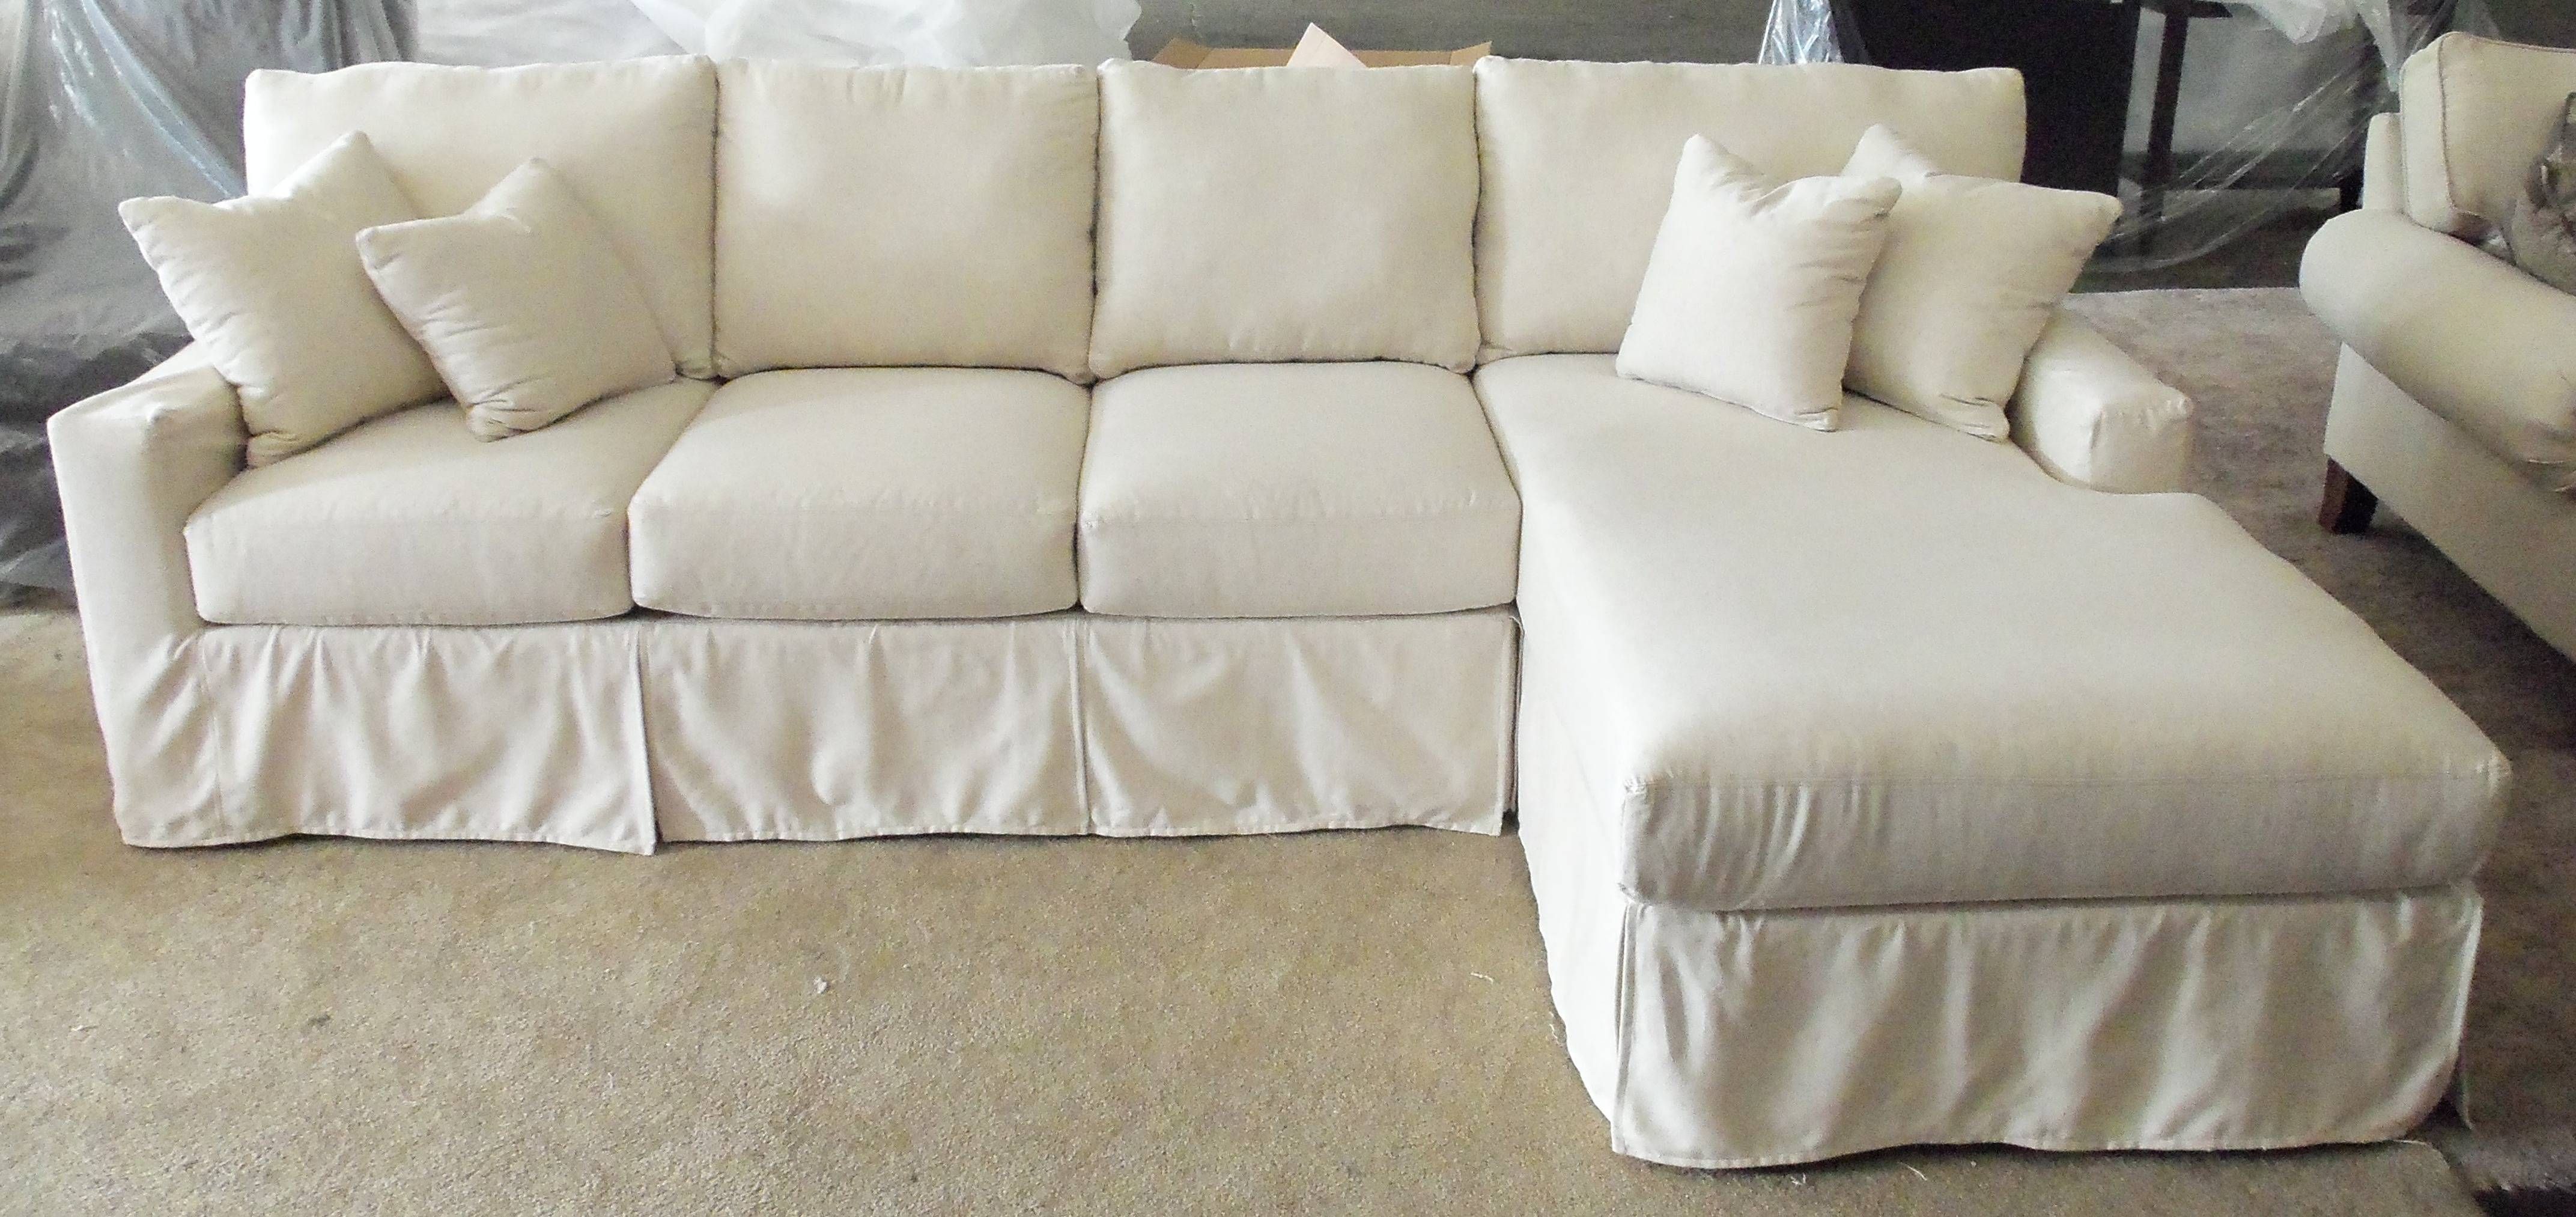 Sofa Bed With Chaise Cover | Centerfieldbar With Regard To Slipcovers For Sleeper Sofas (Photo 12 of 15)